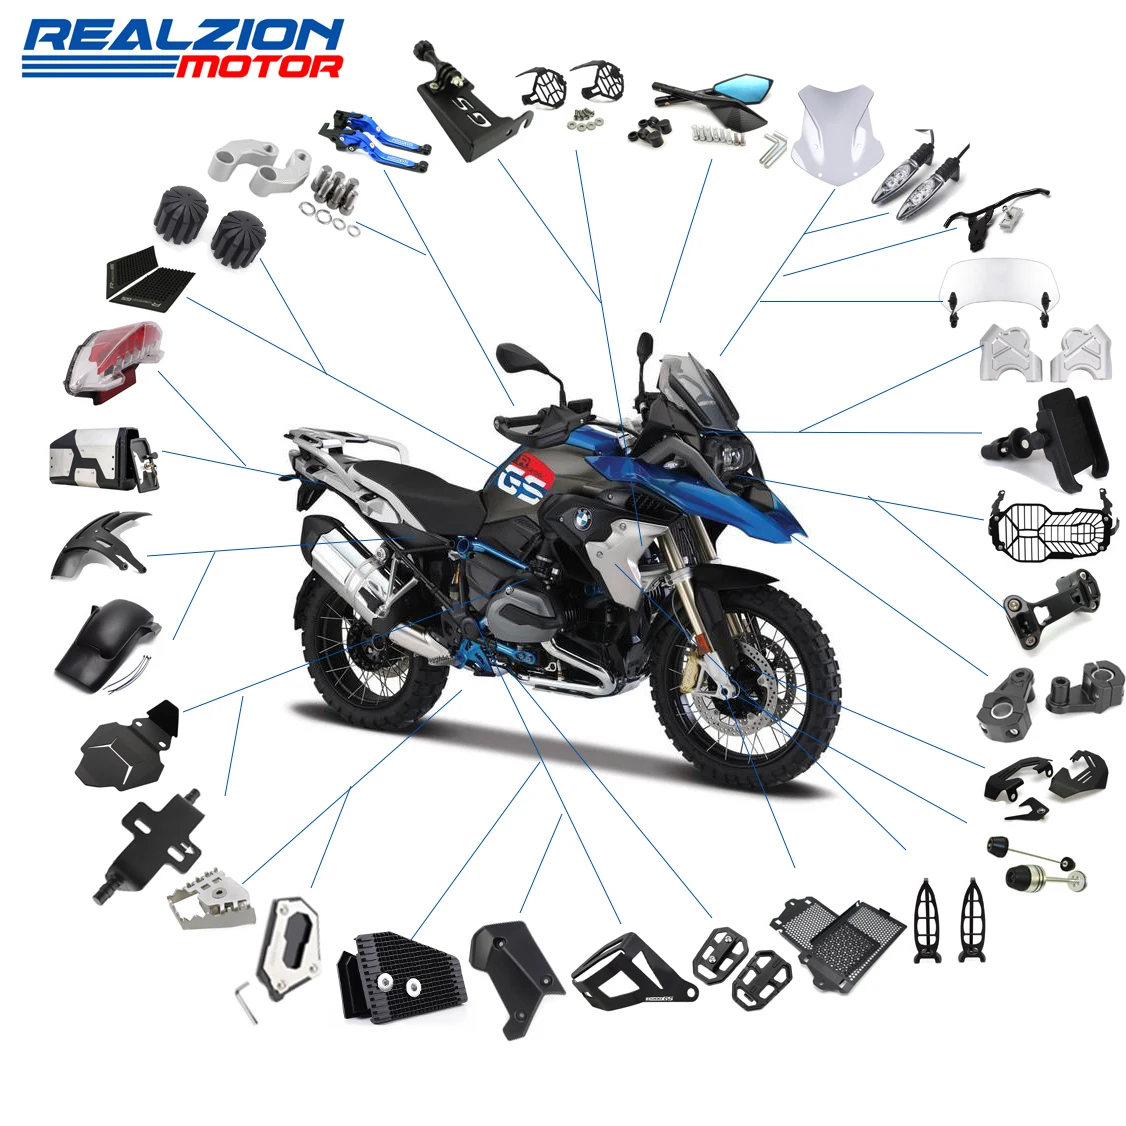 Bmw Motorcycle Parts Western Australia | Reviewmotors.co